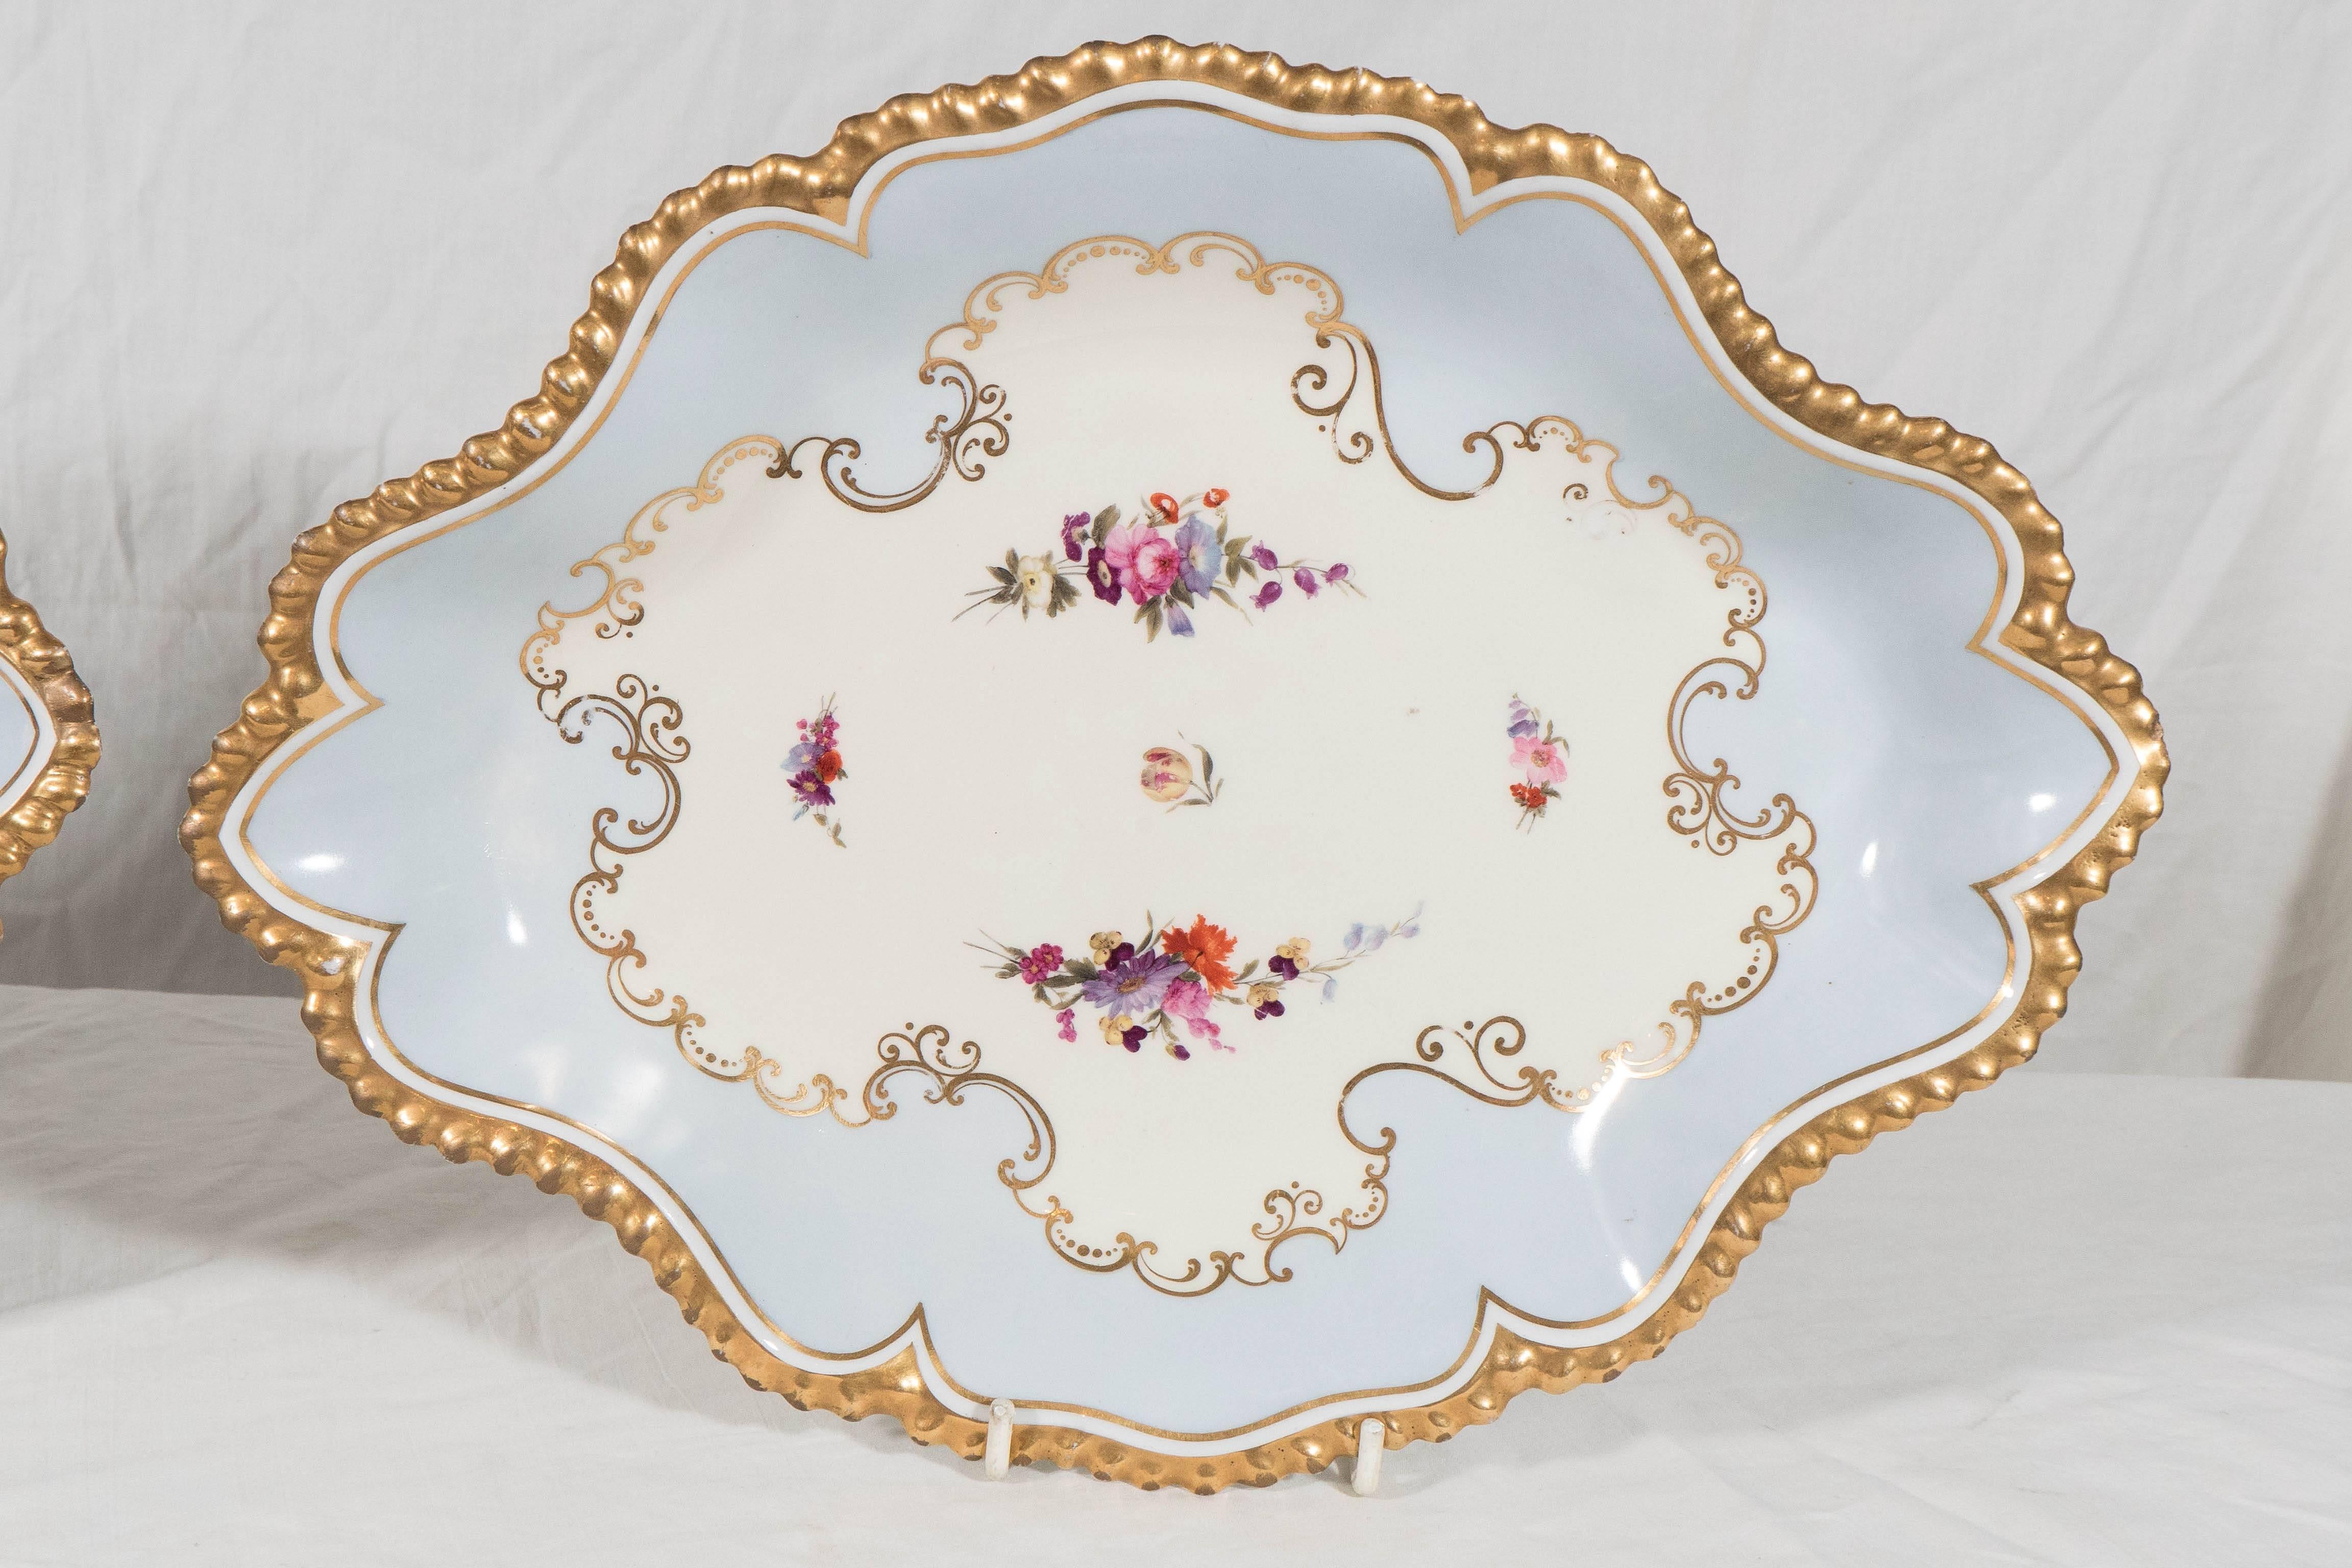  We are pleased to offer this Pair of Flight Barr & Barr Worcester oval-shaped dishes painted in baby blue with beautifully glided, gadrooned edges. England circa 1820
In the center are sprays of hand-painted pink and purple flowers on a white